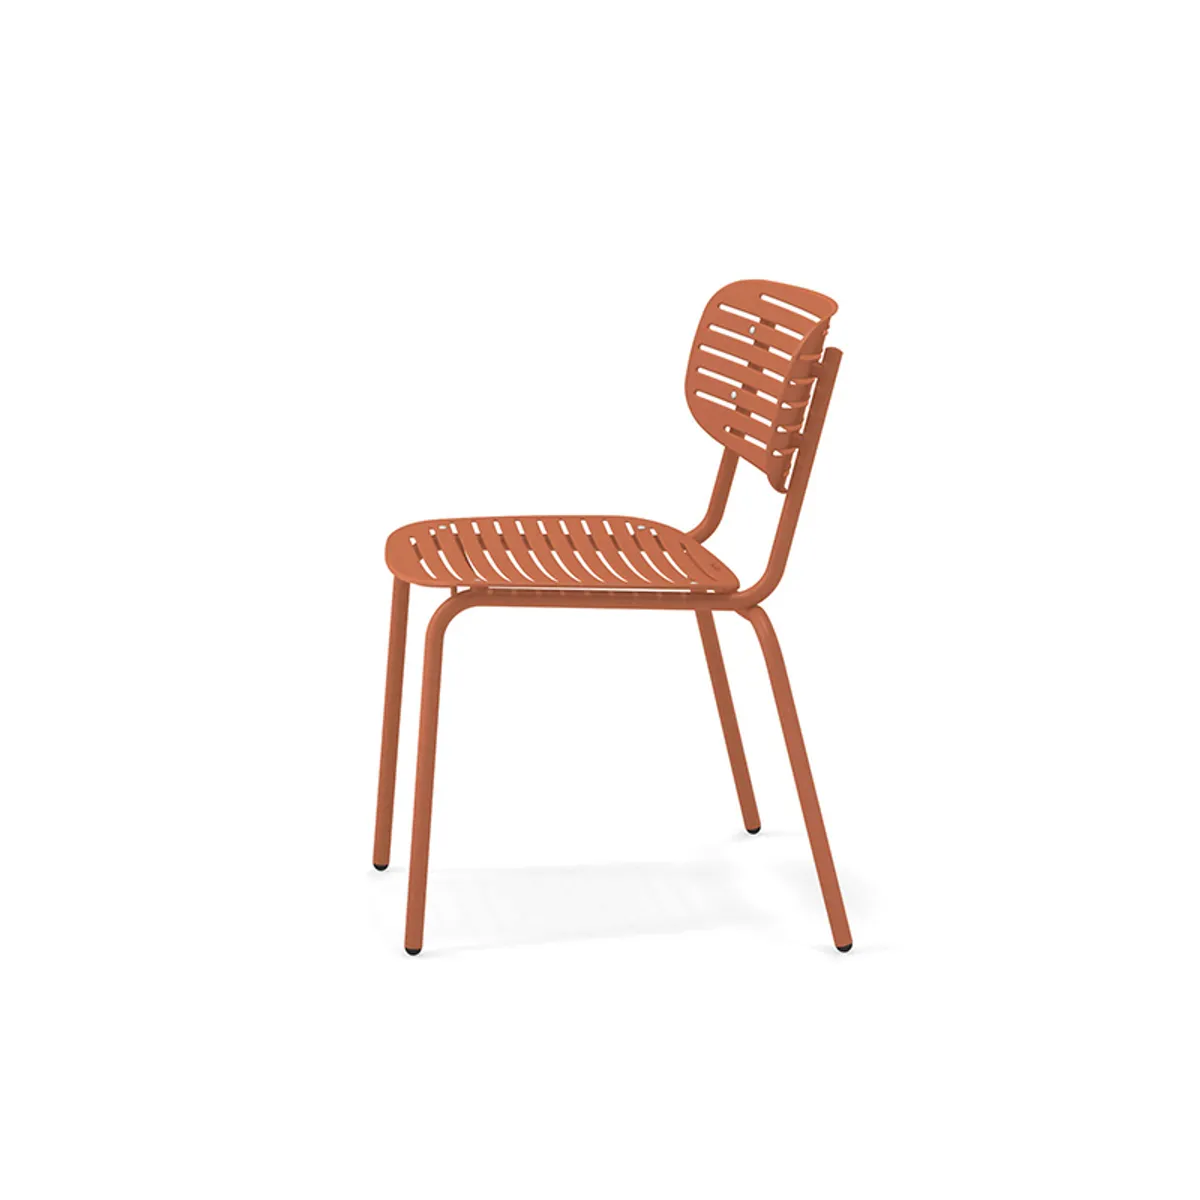 Mom Side Chair In Orange Metal Furniture For Outdoors 032